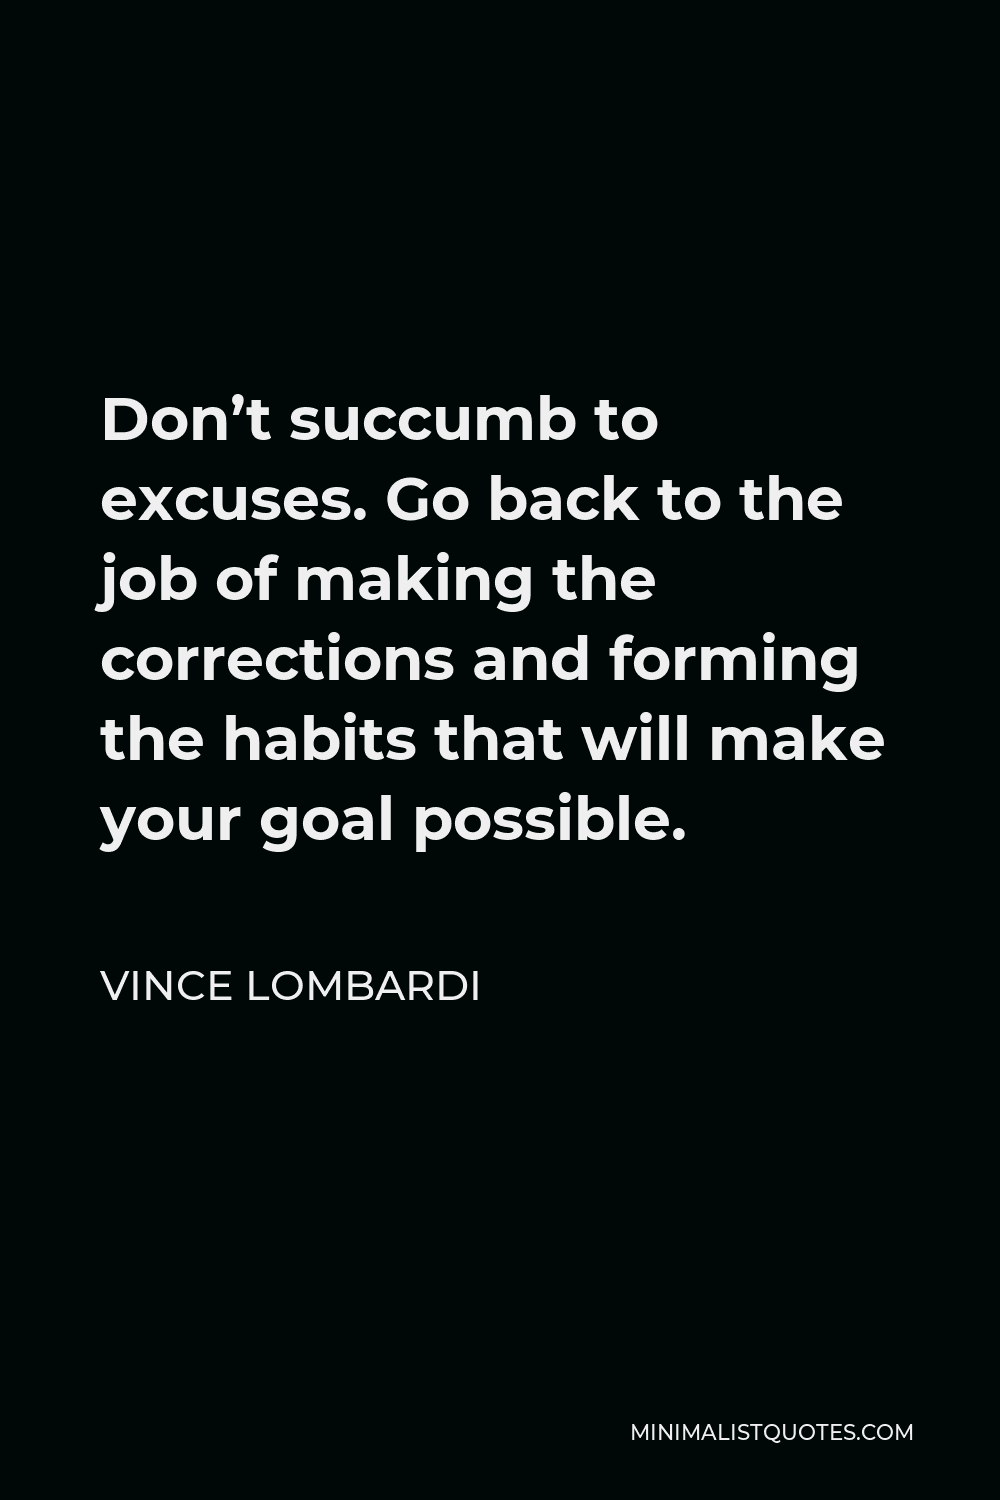 Vince Lombardi Quote - Don’t succumb to excuses. Go back to the job of making the corrections and forming the habits that will make your goal possible.